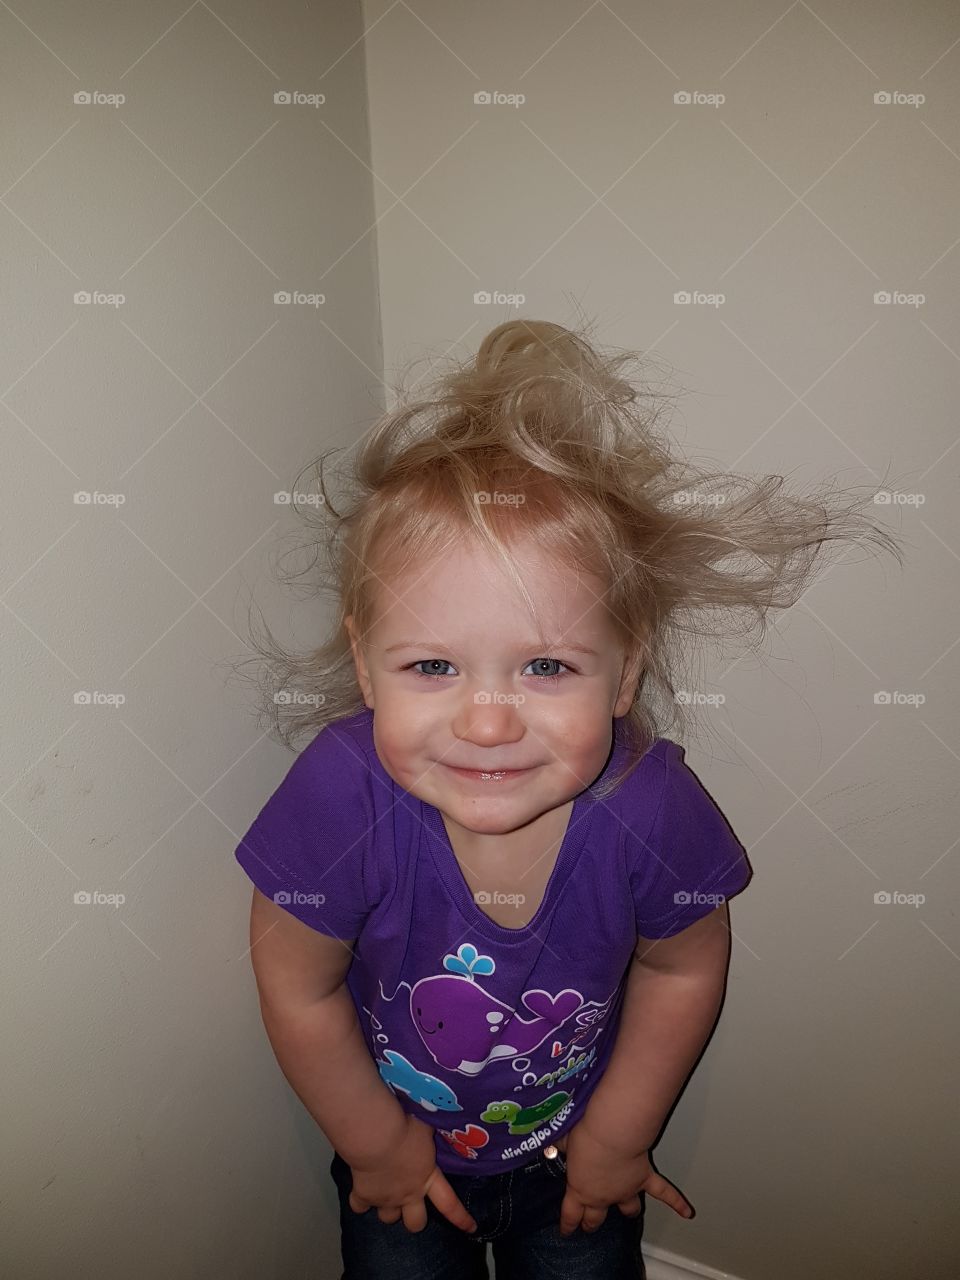 Smiling little girl with messy hair sticking out